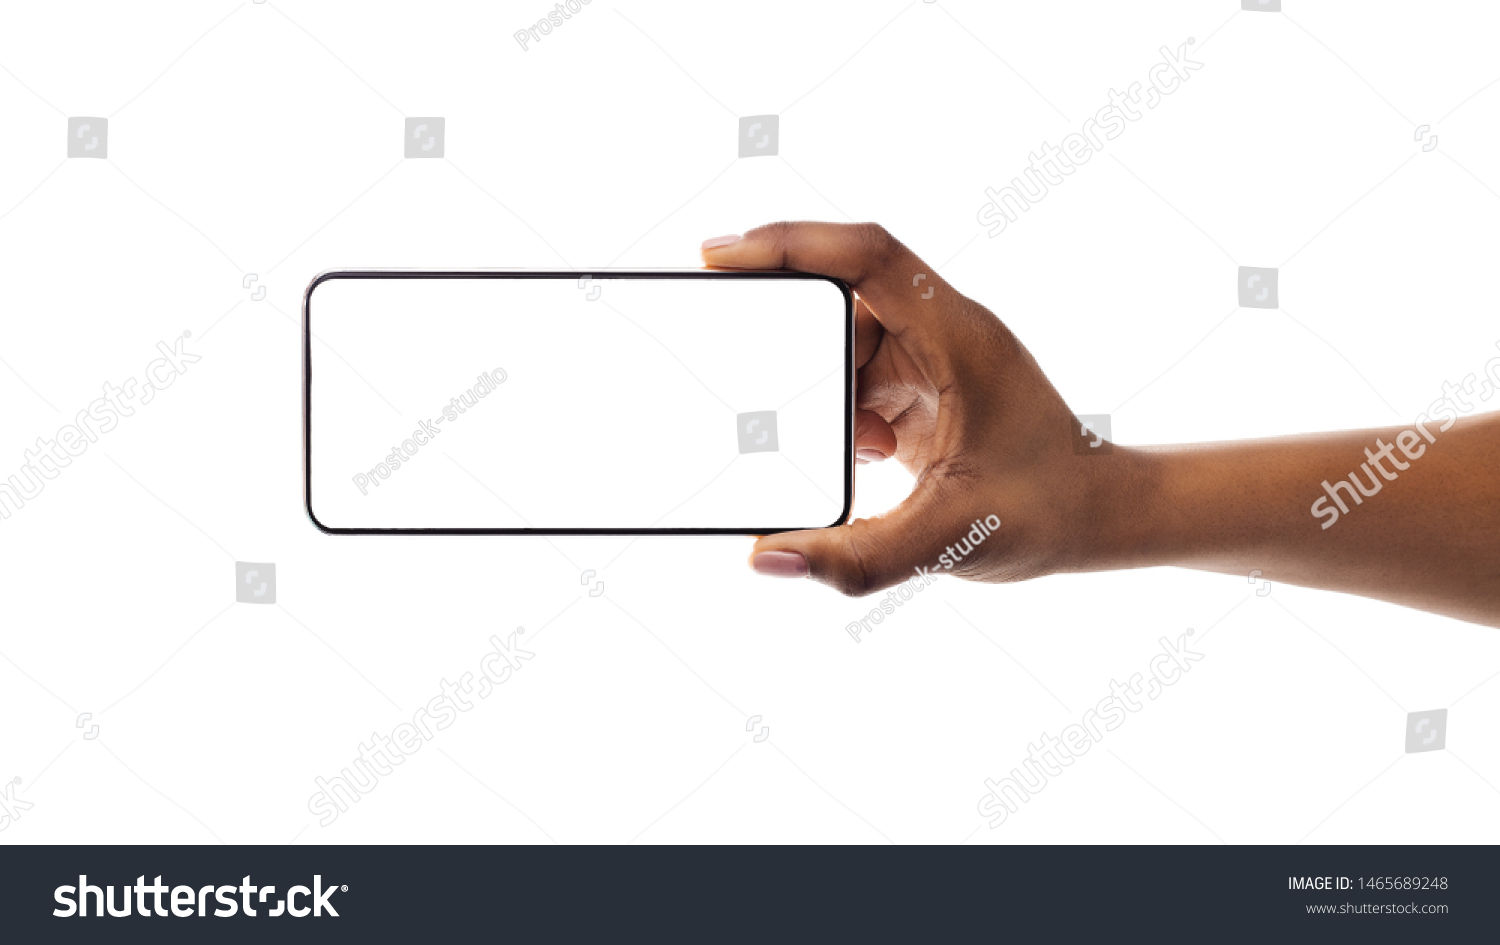 Mockup Image Of Smartphone With Blank Screen In Black Girl's Hand Isolated On White. Panorama, Copy Space #1465689248